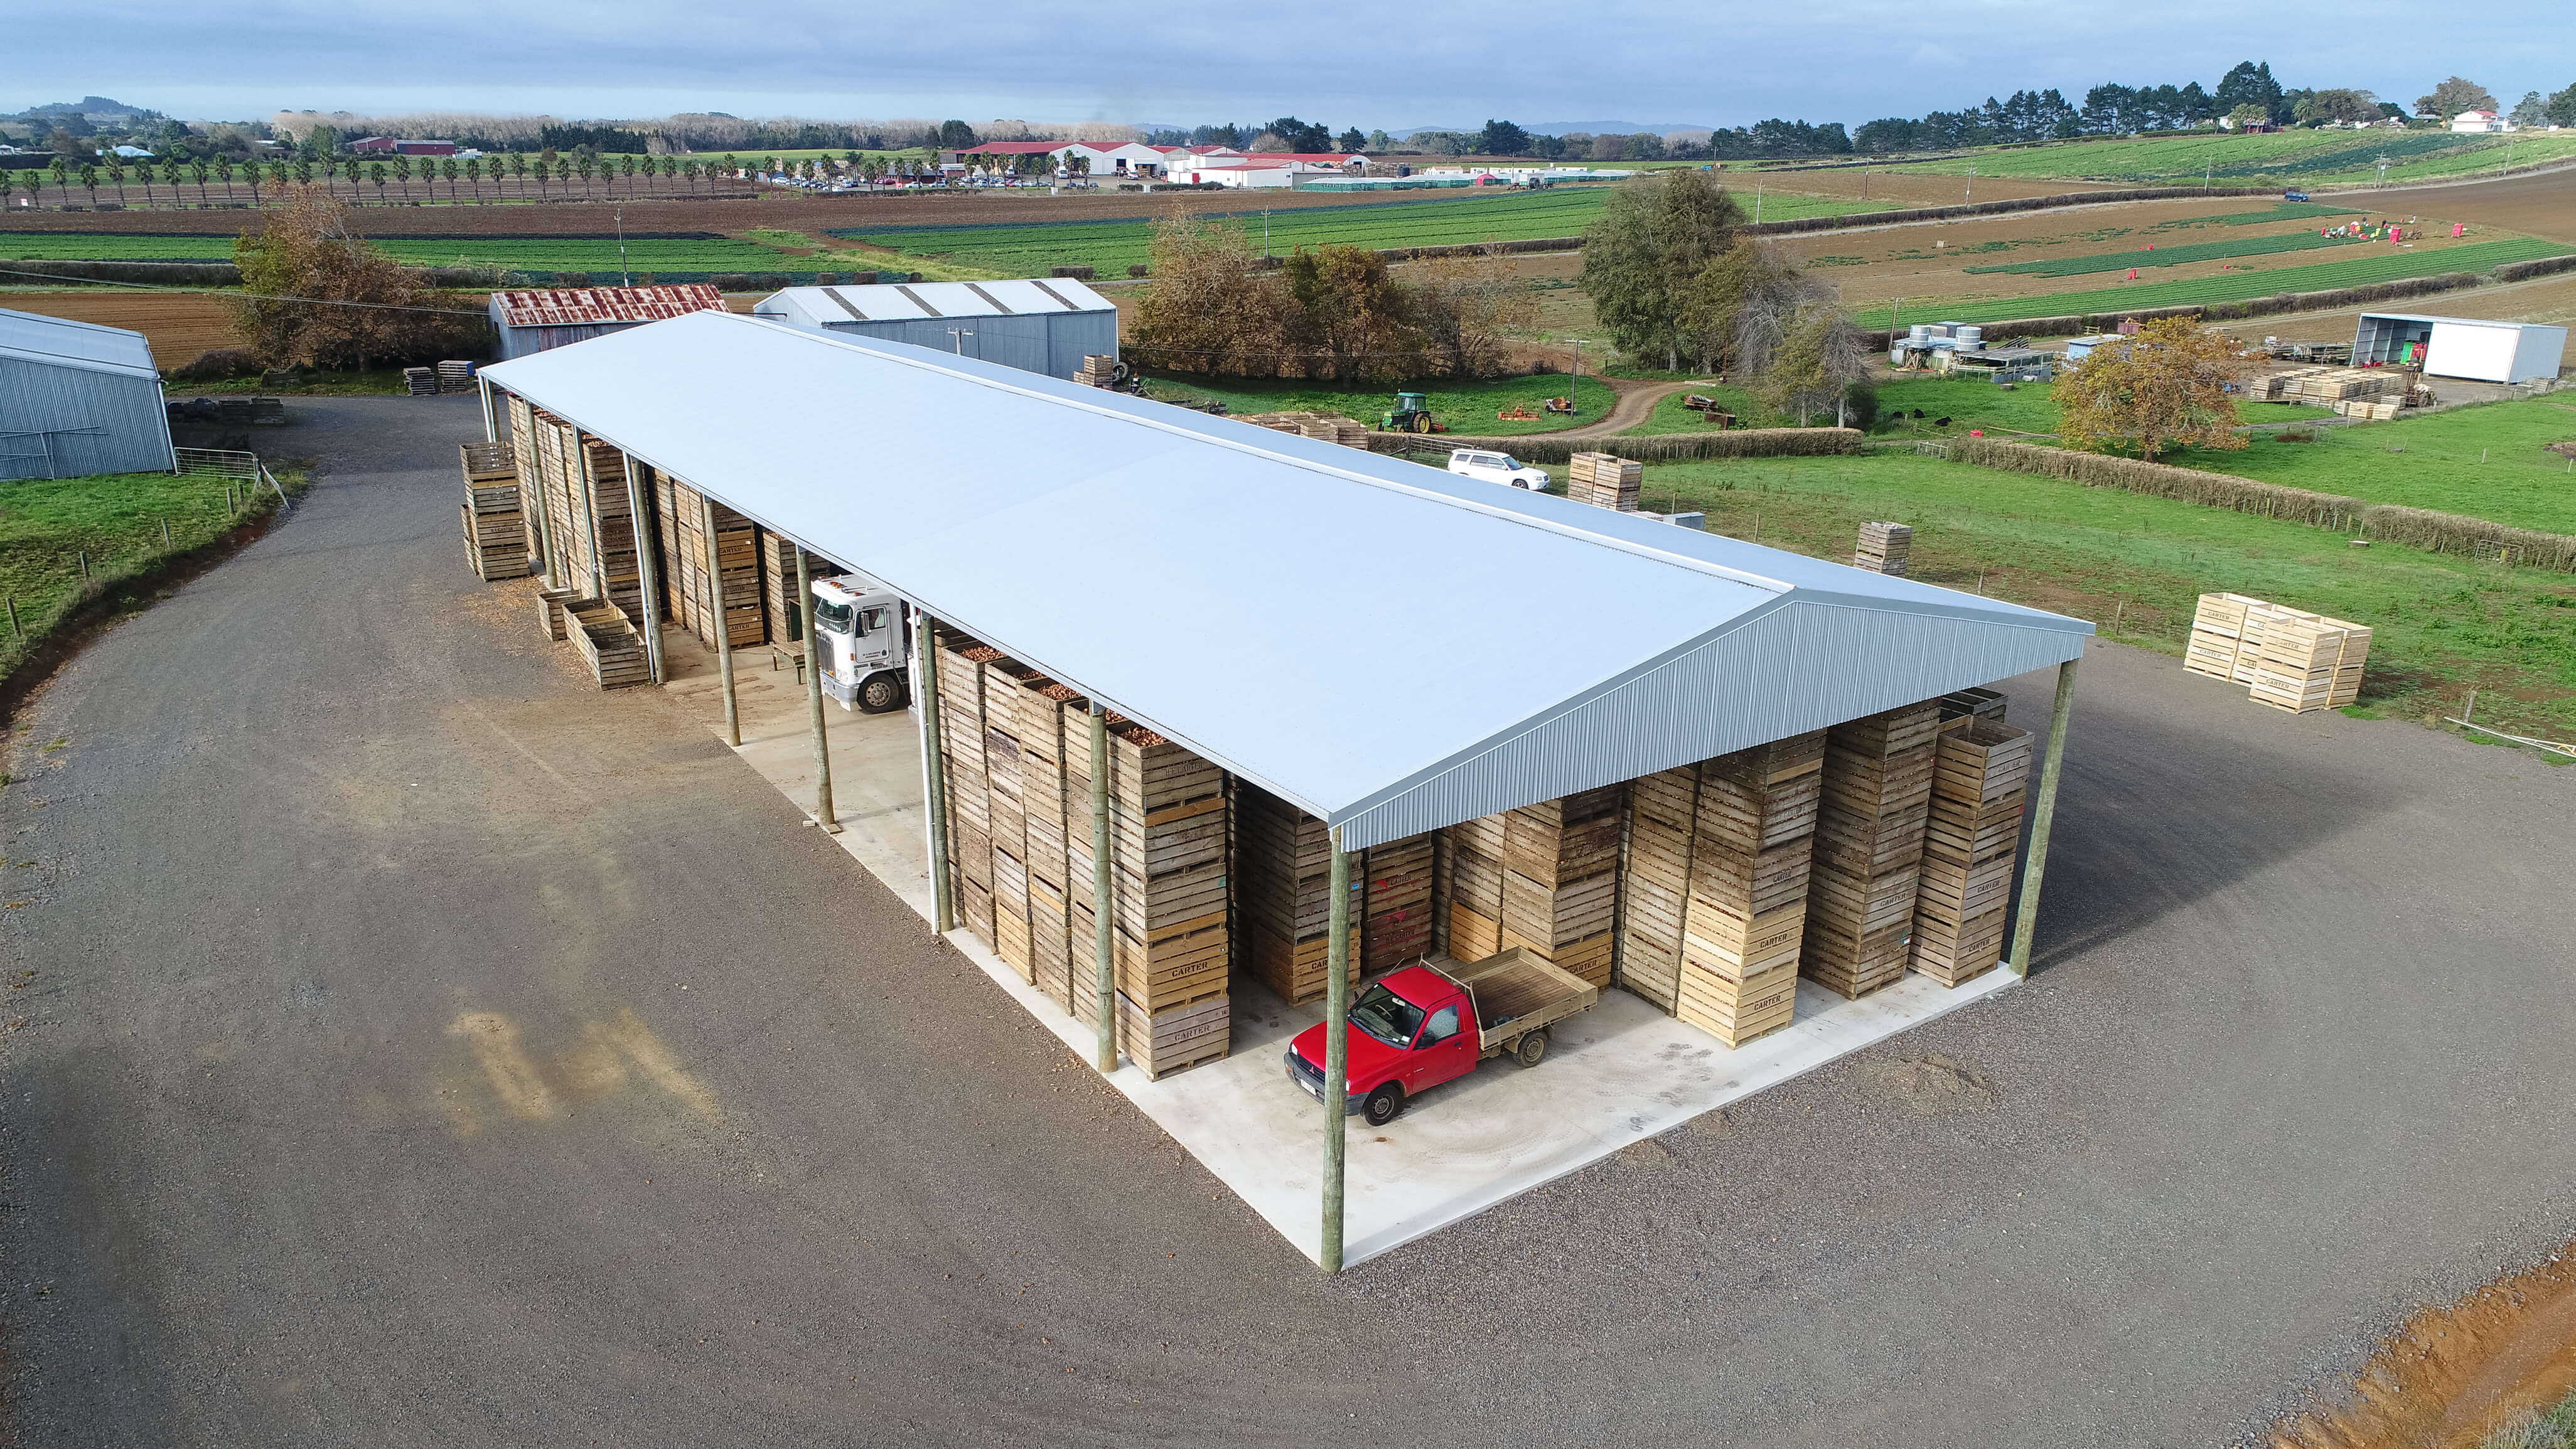 Need an extra large storage shed? See this 12m shed!